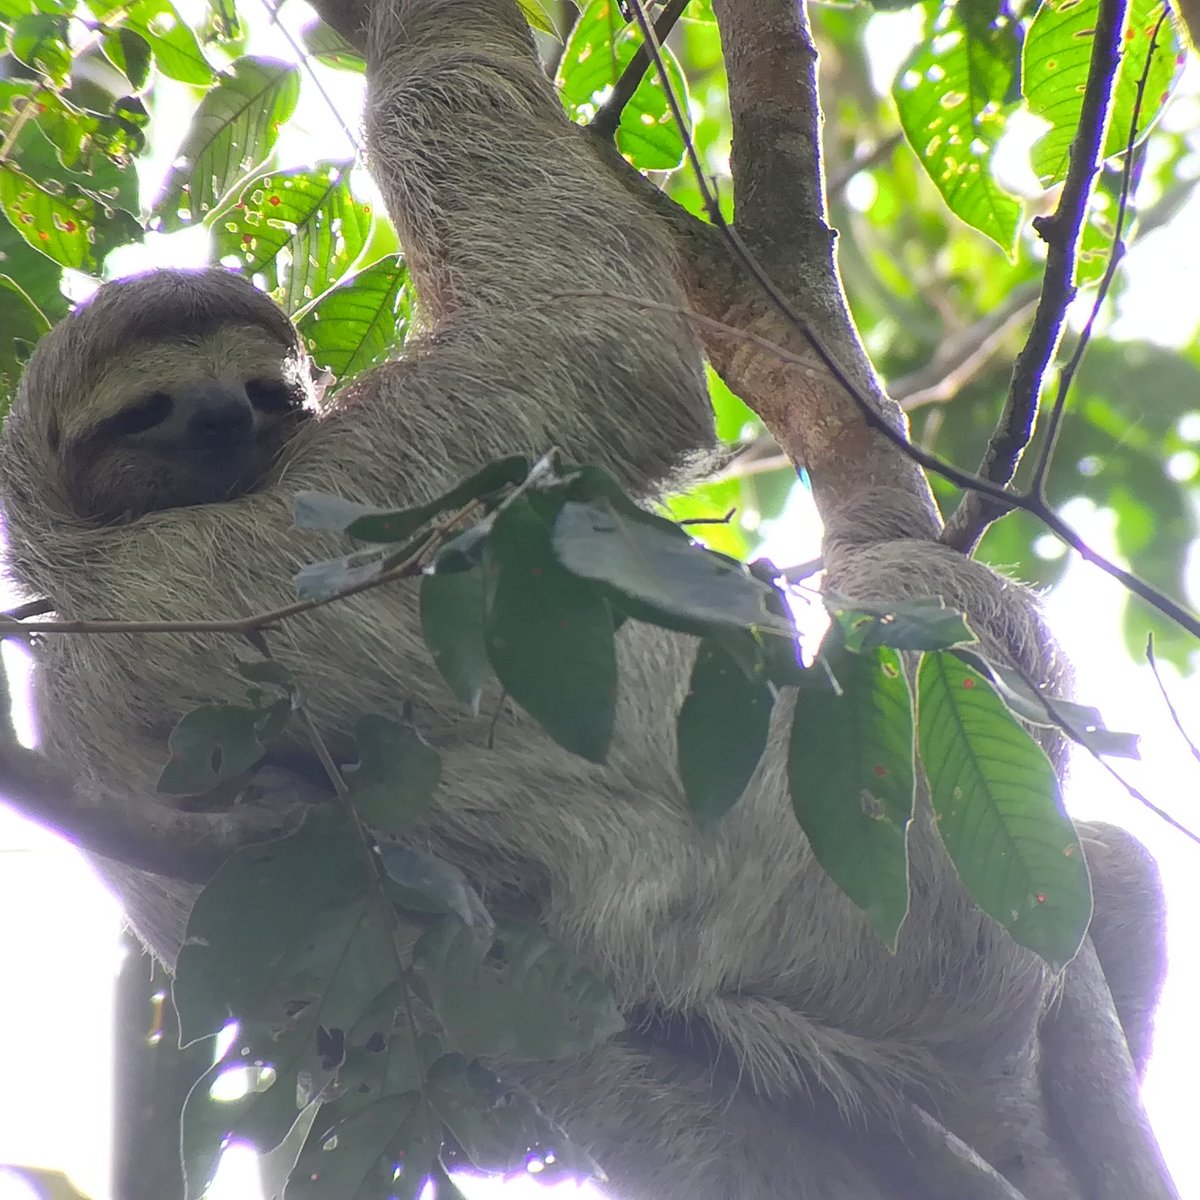 What a poseur! #sloths in #CostaRica #travel #expeditioncruises #oneoceanexpeditions